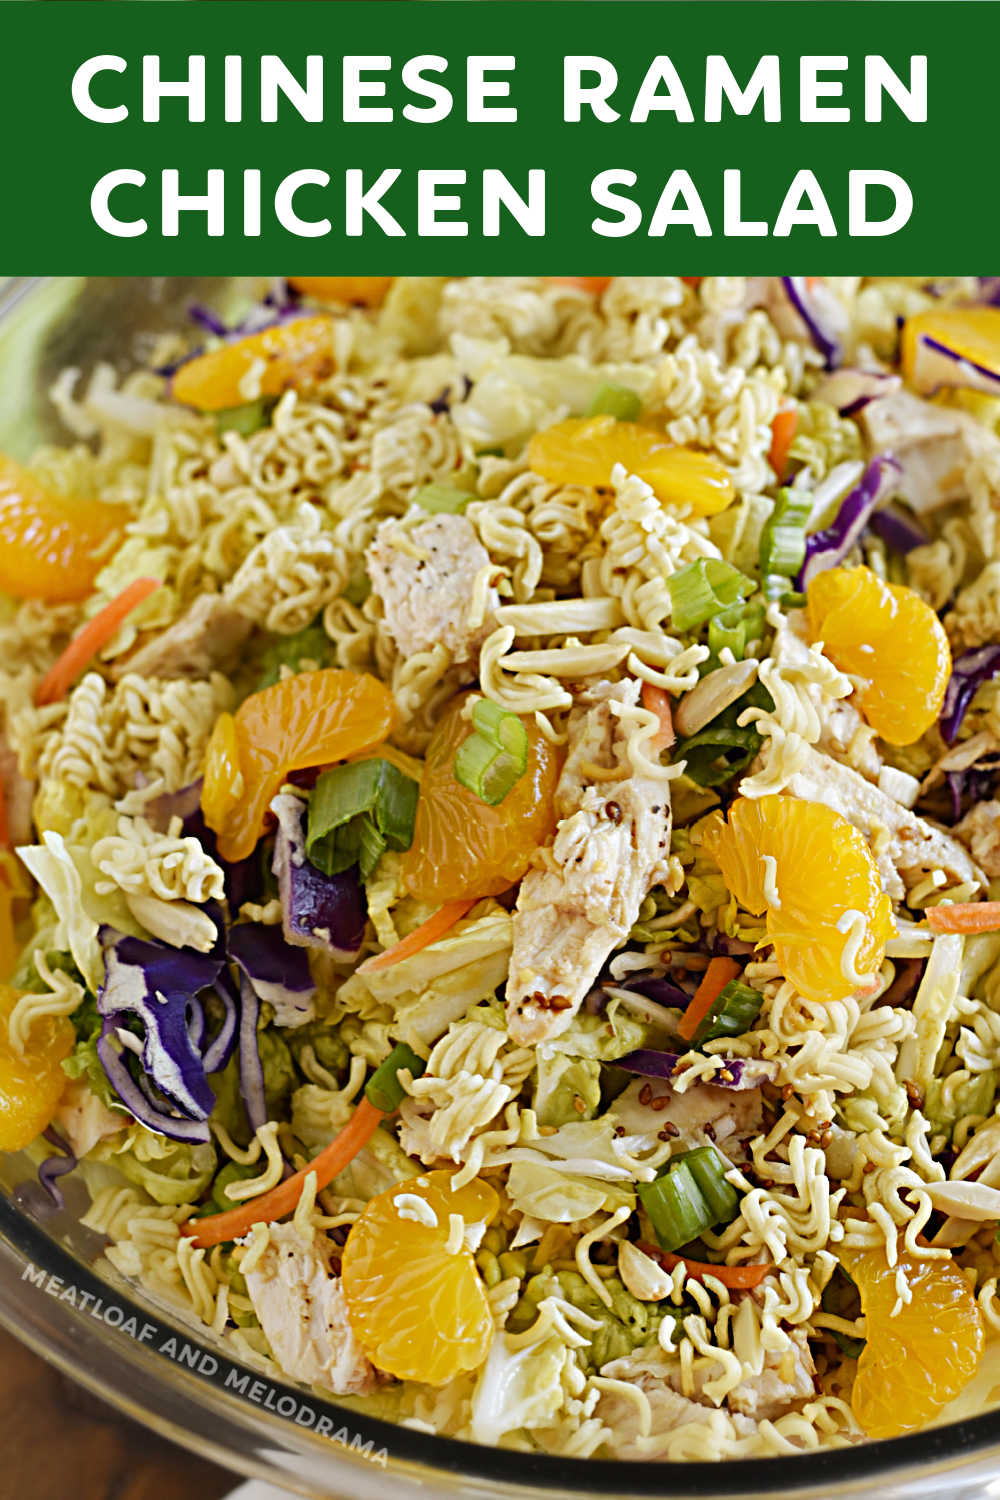 Chinese Ramen Chicken Salad with crunchy ramen noodles, Napa cabbage, coleslaw mix and Mandarin oranges is an easy main dish salad perfect for summer. With its tangy homemade dressing, this easy meal is a family favorite and perfect for potluck dinners! via @meamel